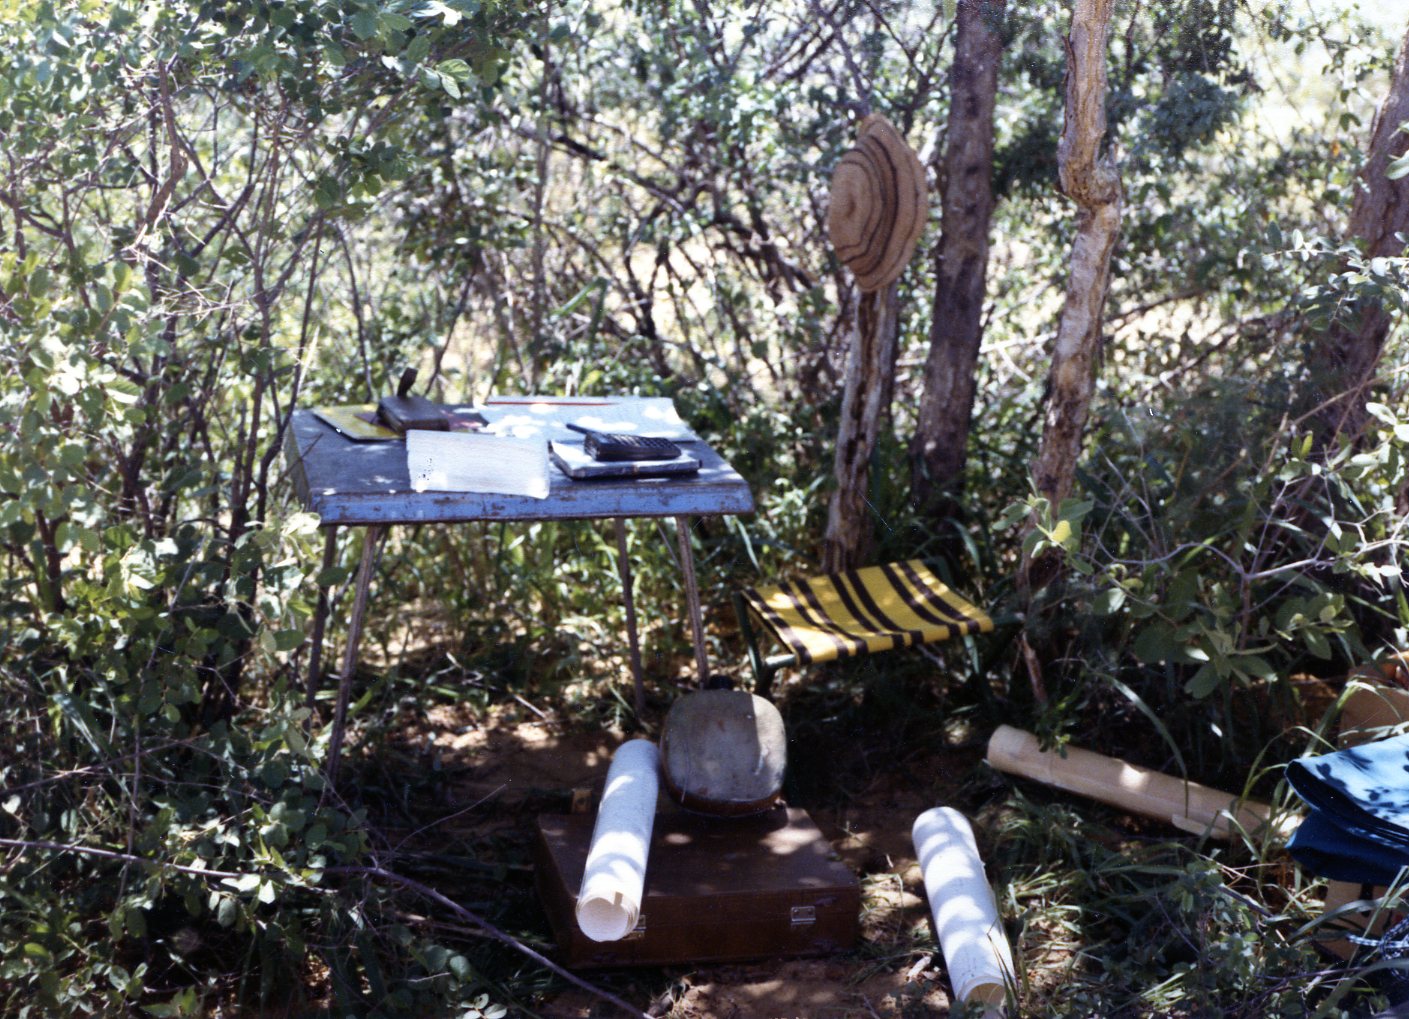 tools for processing survey work on location in Namibia in the 1980's